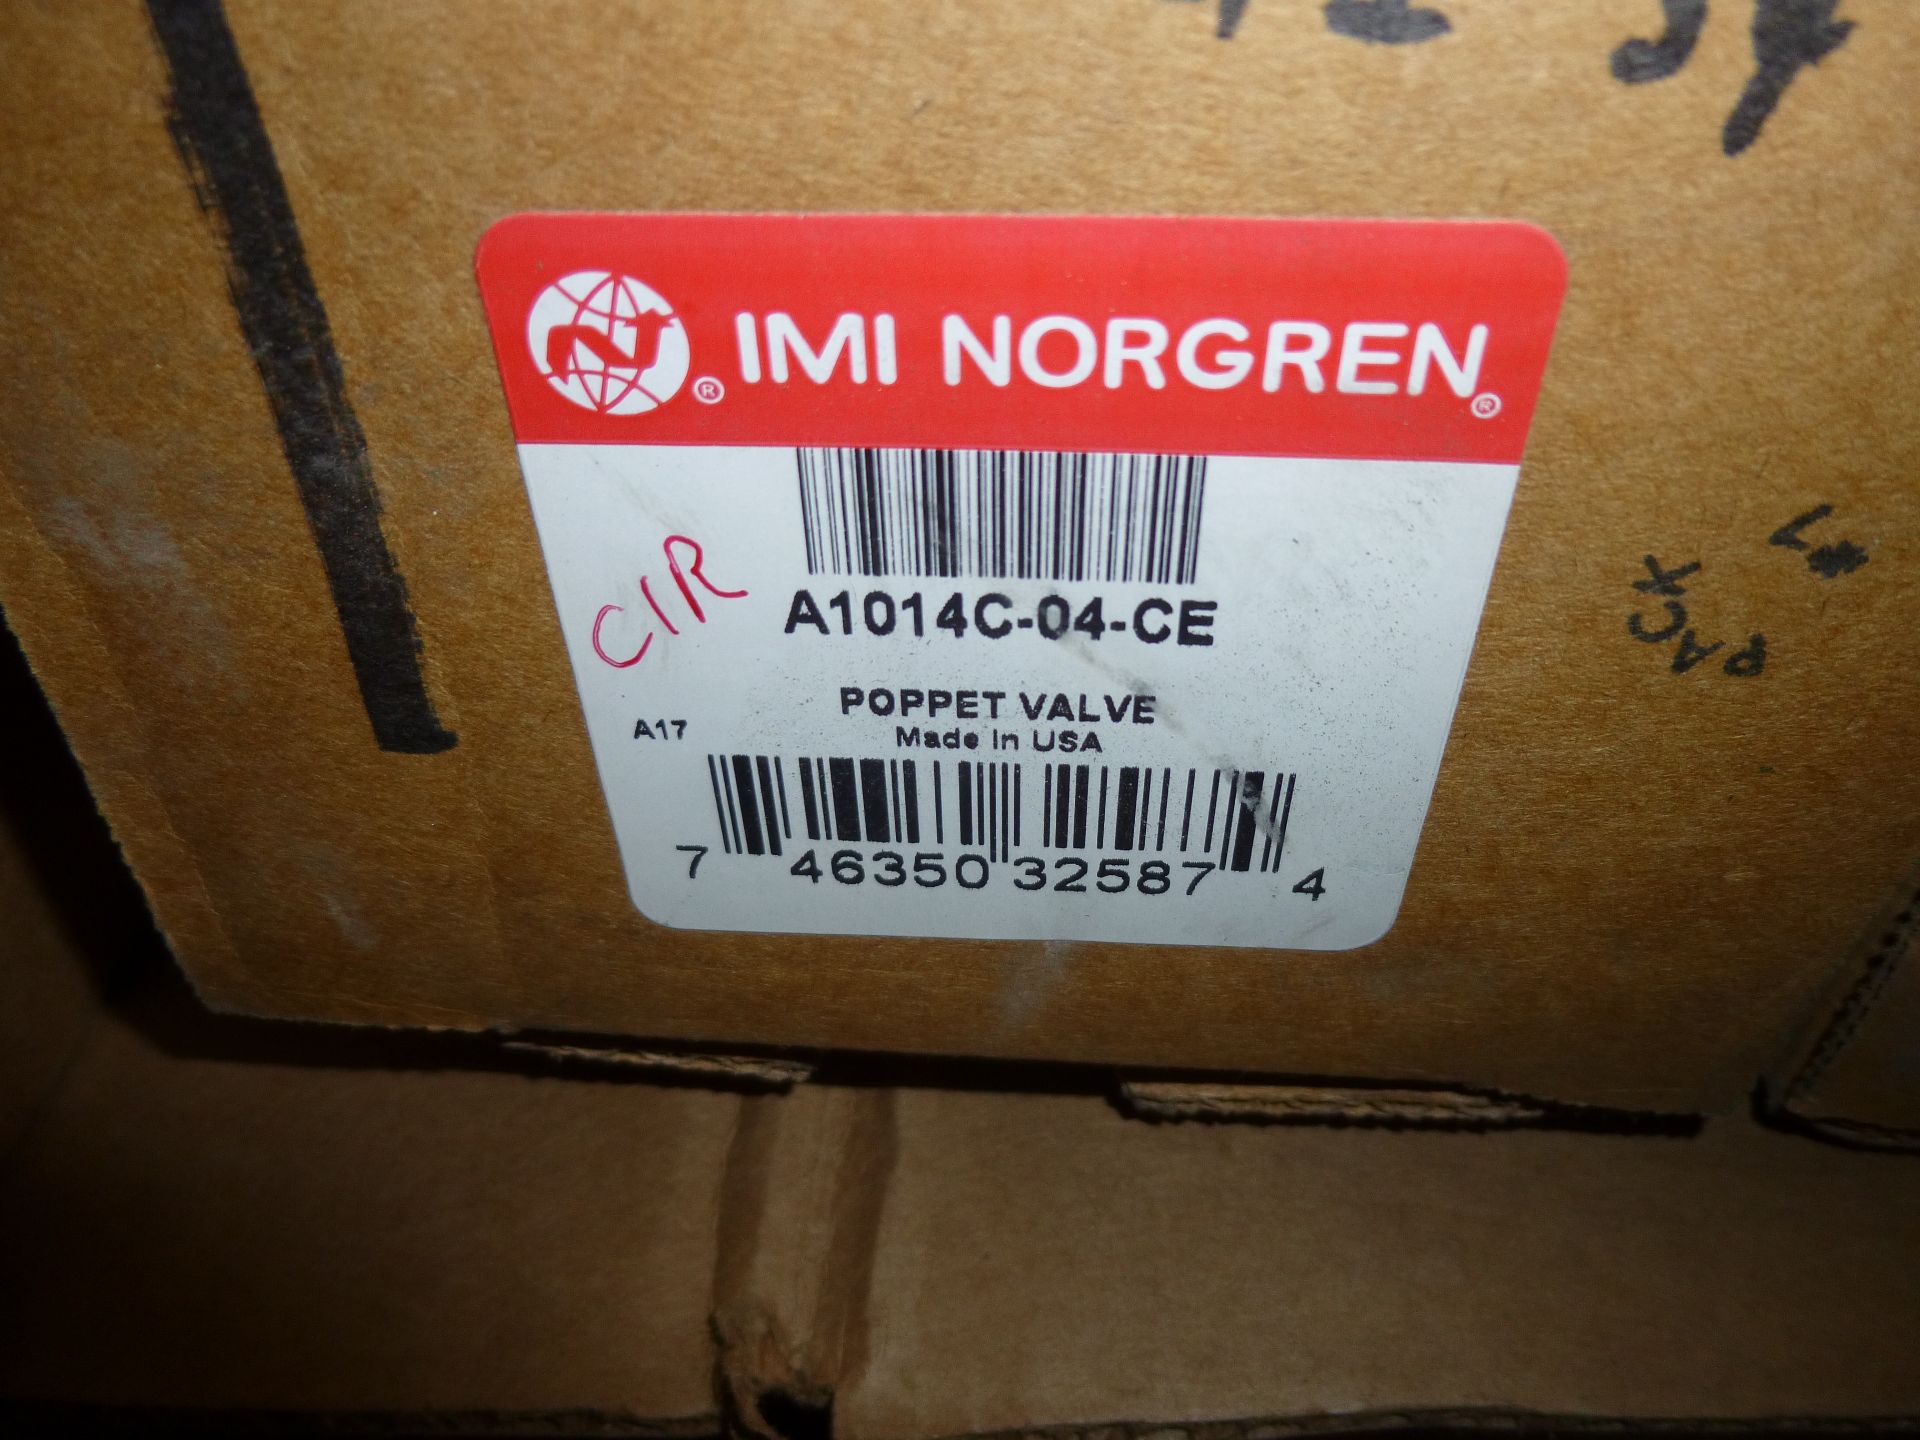 Qty 2 Norgren model A1014C-04-CE poppet valves, new in box, as always with Brolyn LLC auctions, - Image 2 of 2